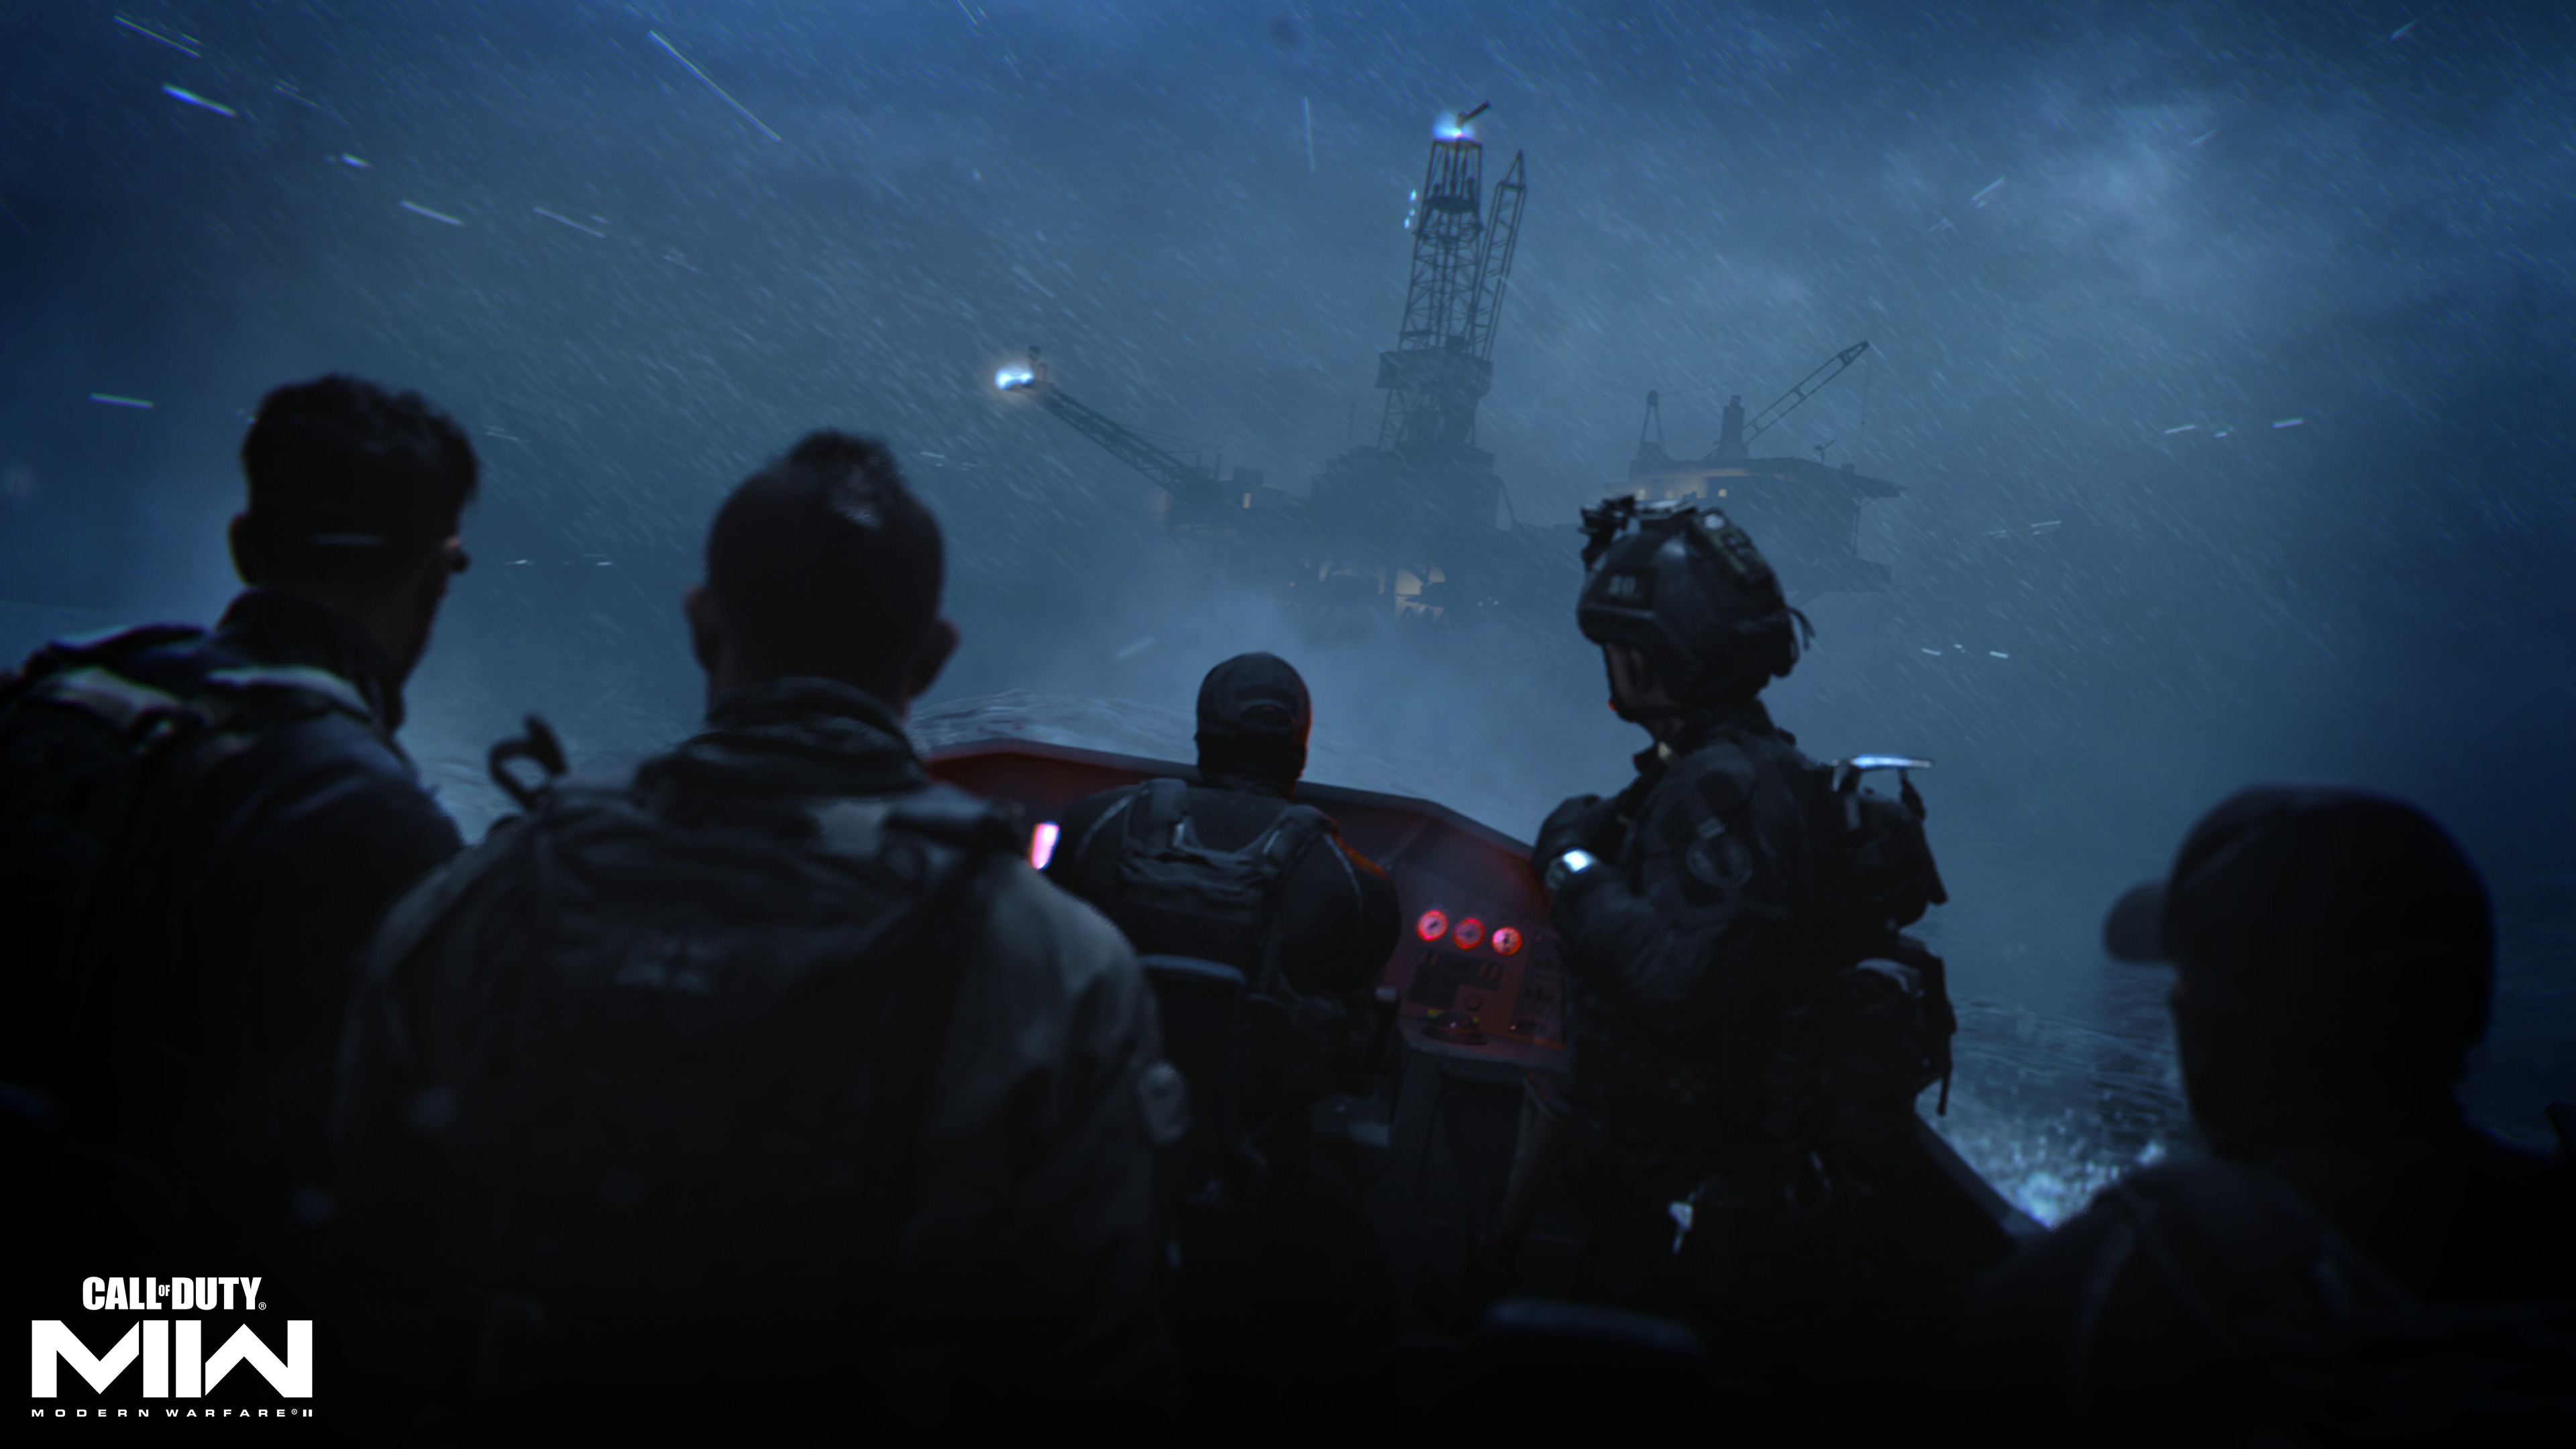 Image for I like the look of Call of Duty: Modern Warfare 2's fancy new water tech